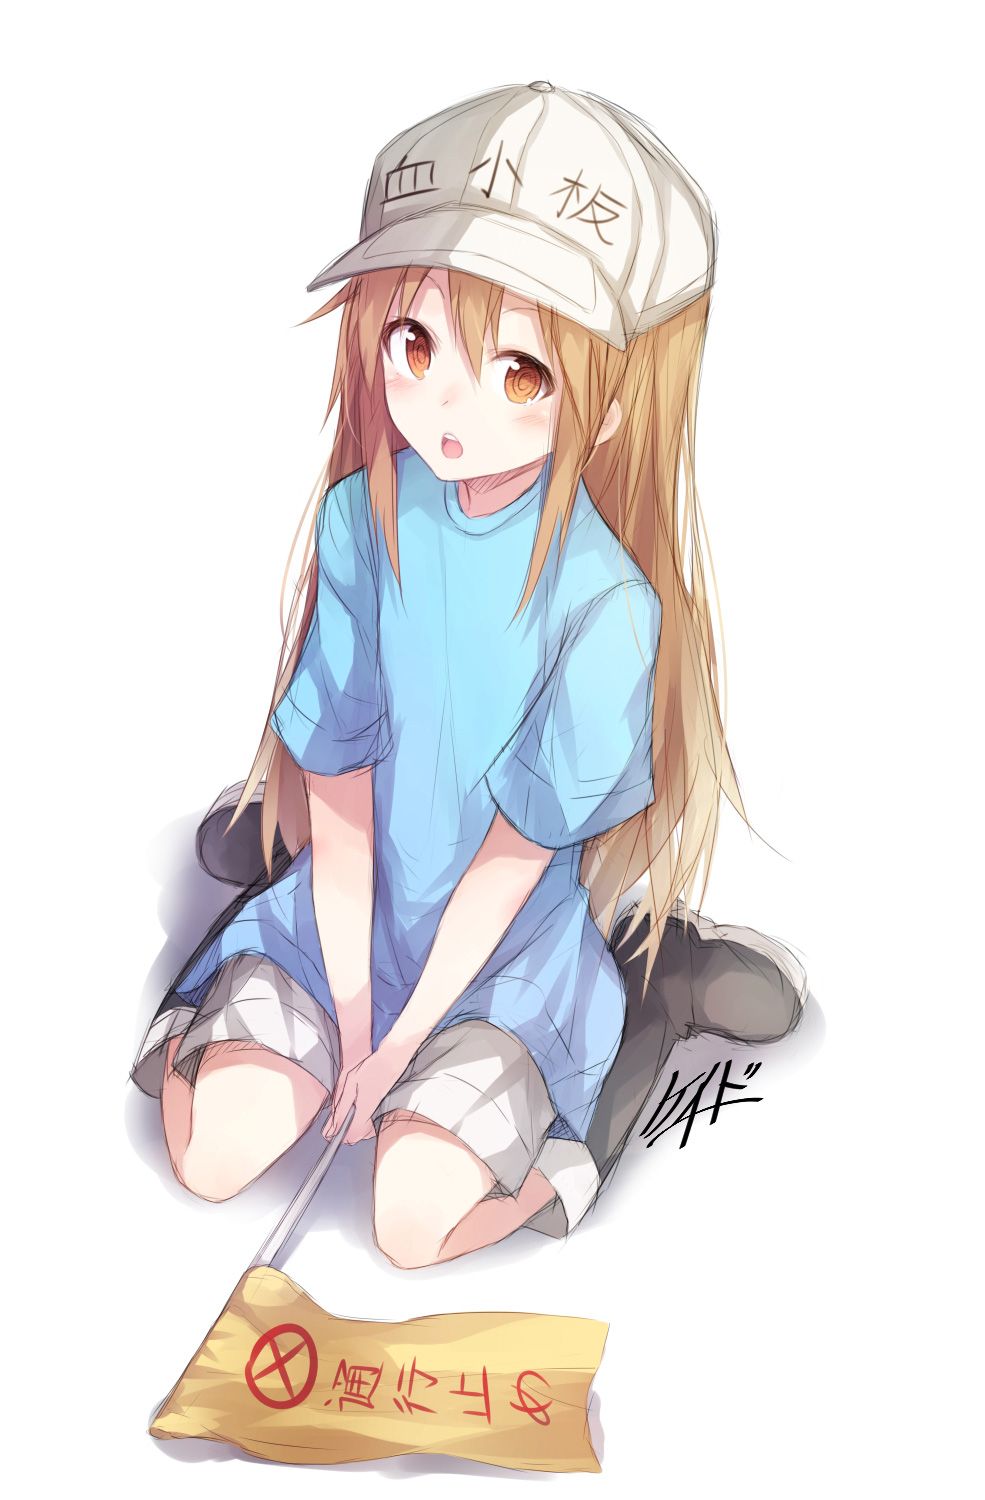 [Working cells] secondary images of platelets 1 60 sheets [ero/non-erotic] 36